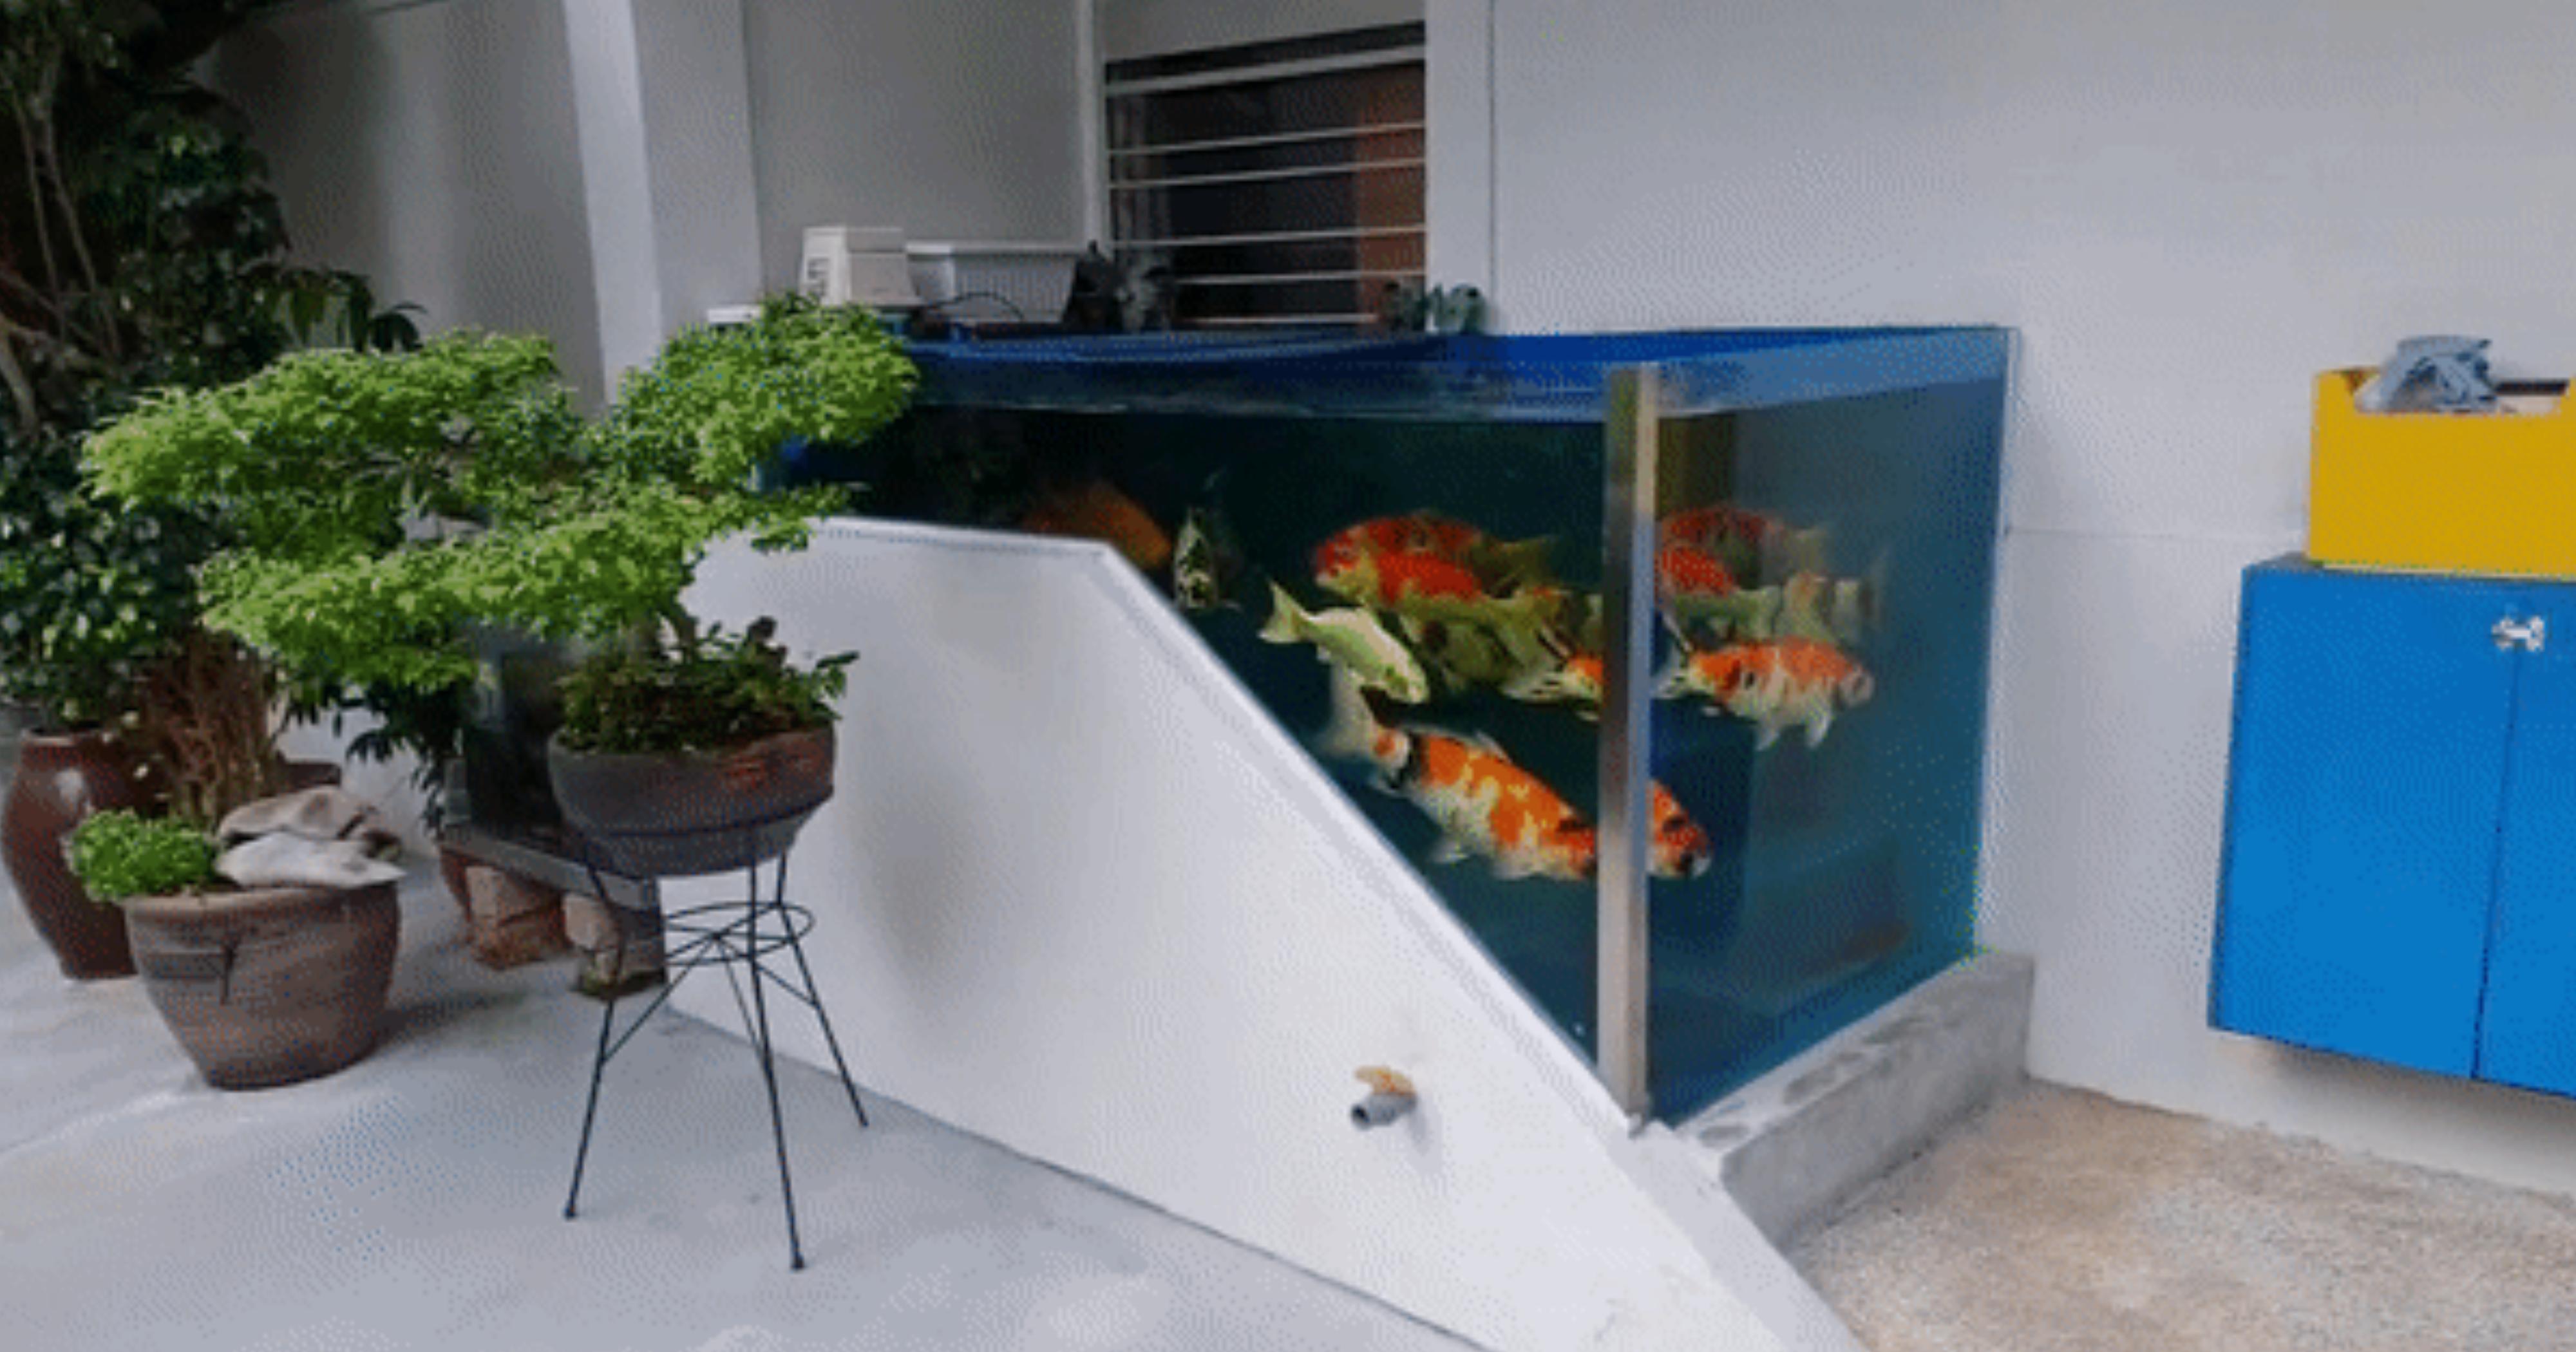 Tampines flat koi pond to be removed soon, HDB rejects appeal